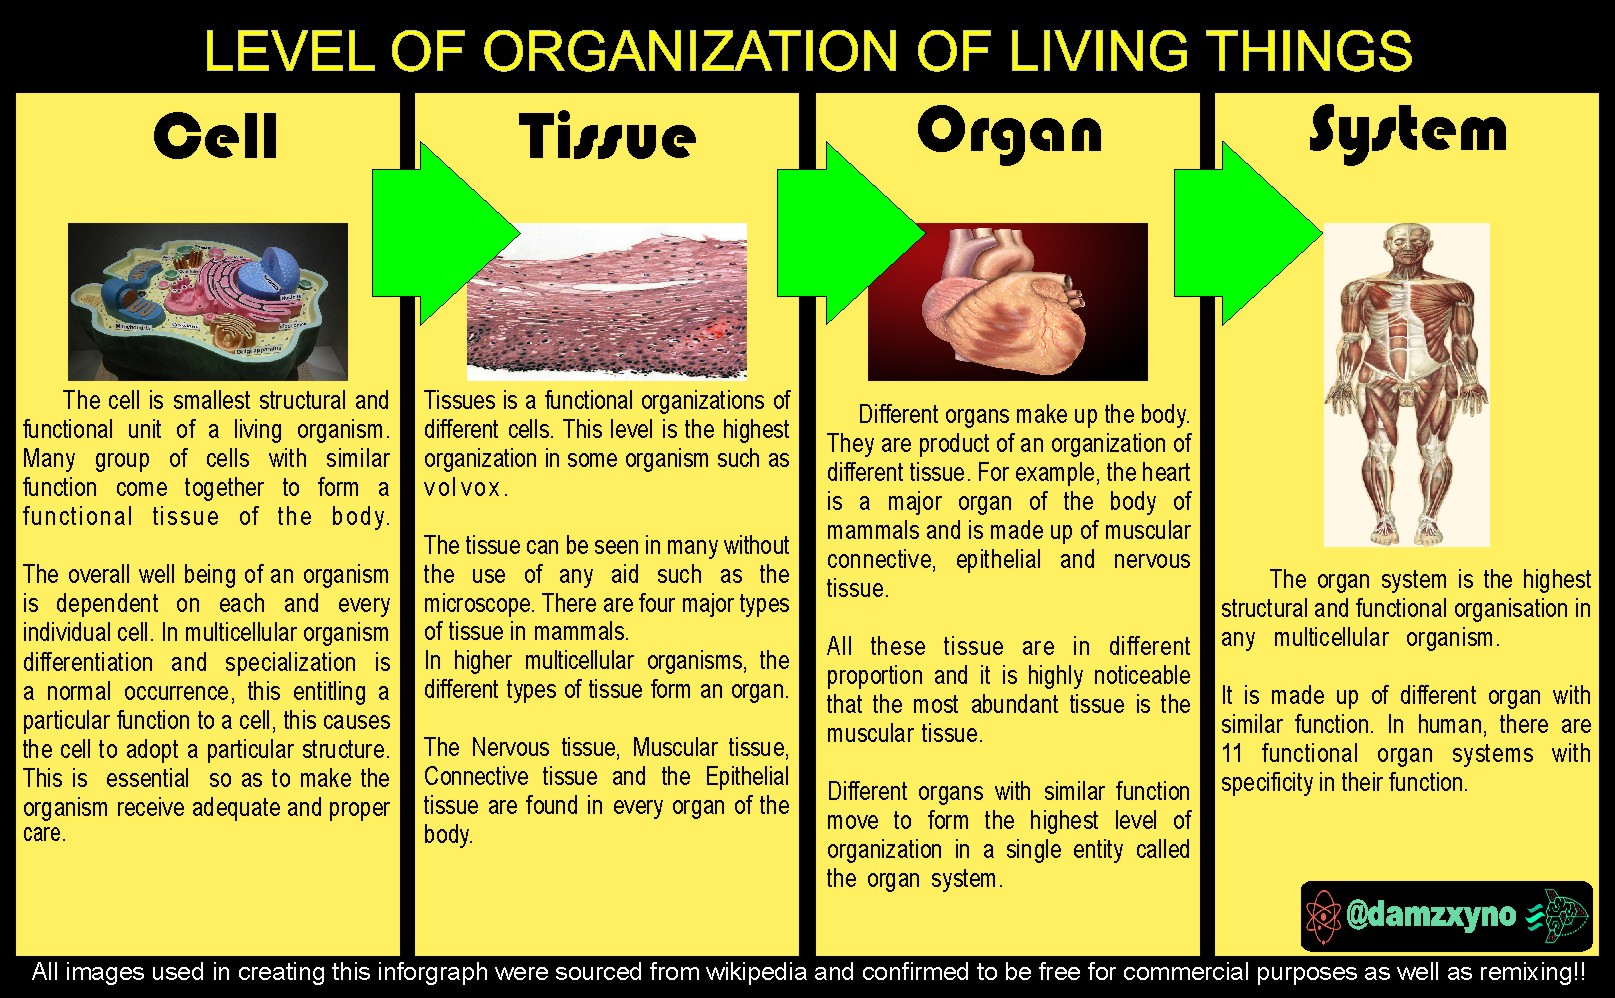 Tissues and organs